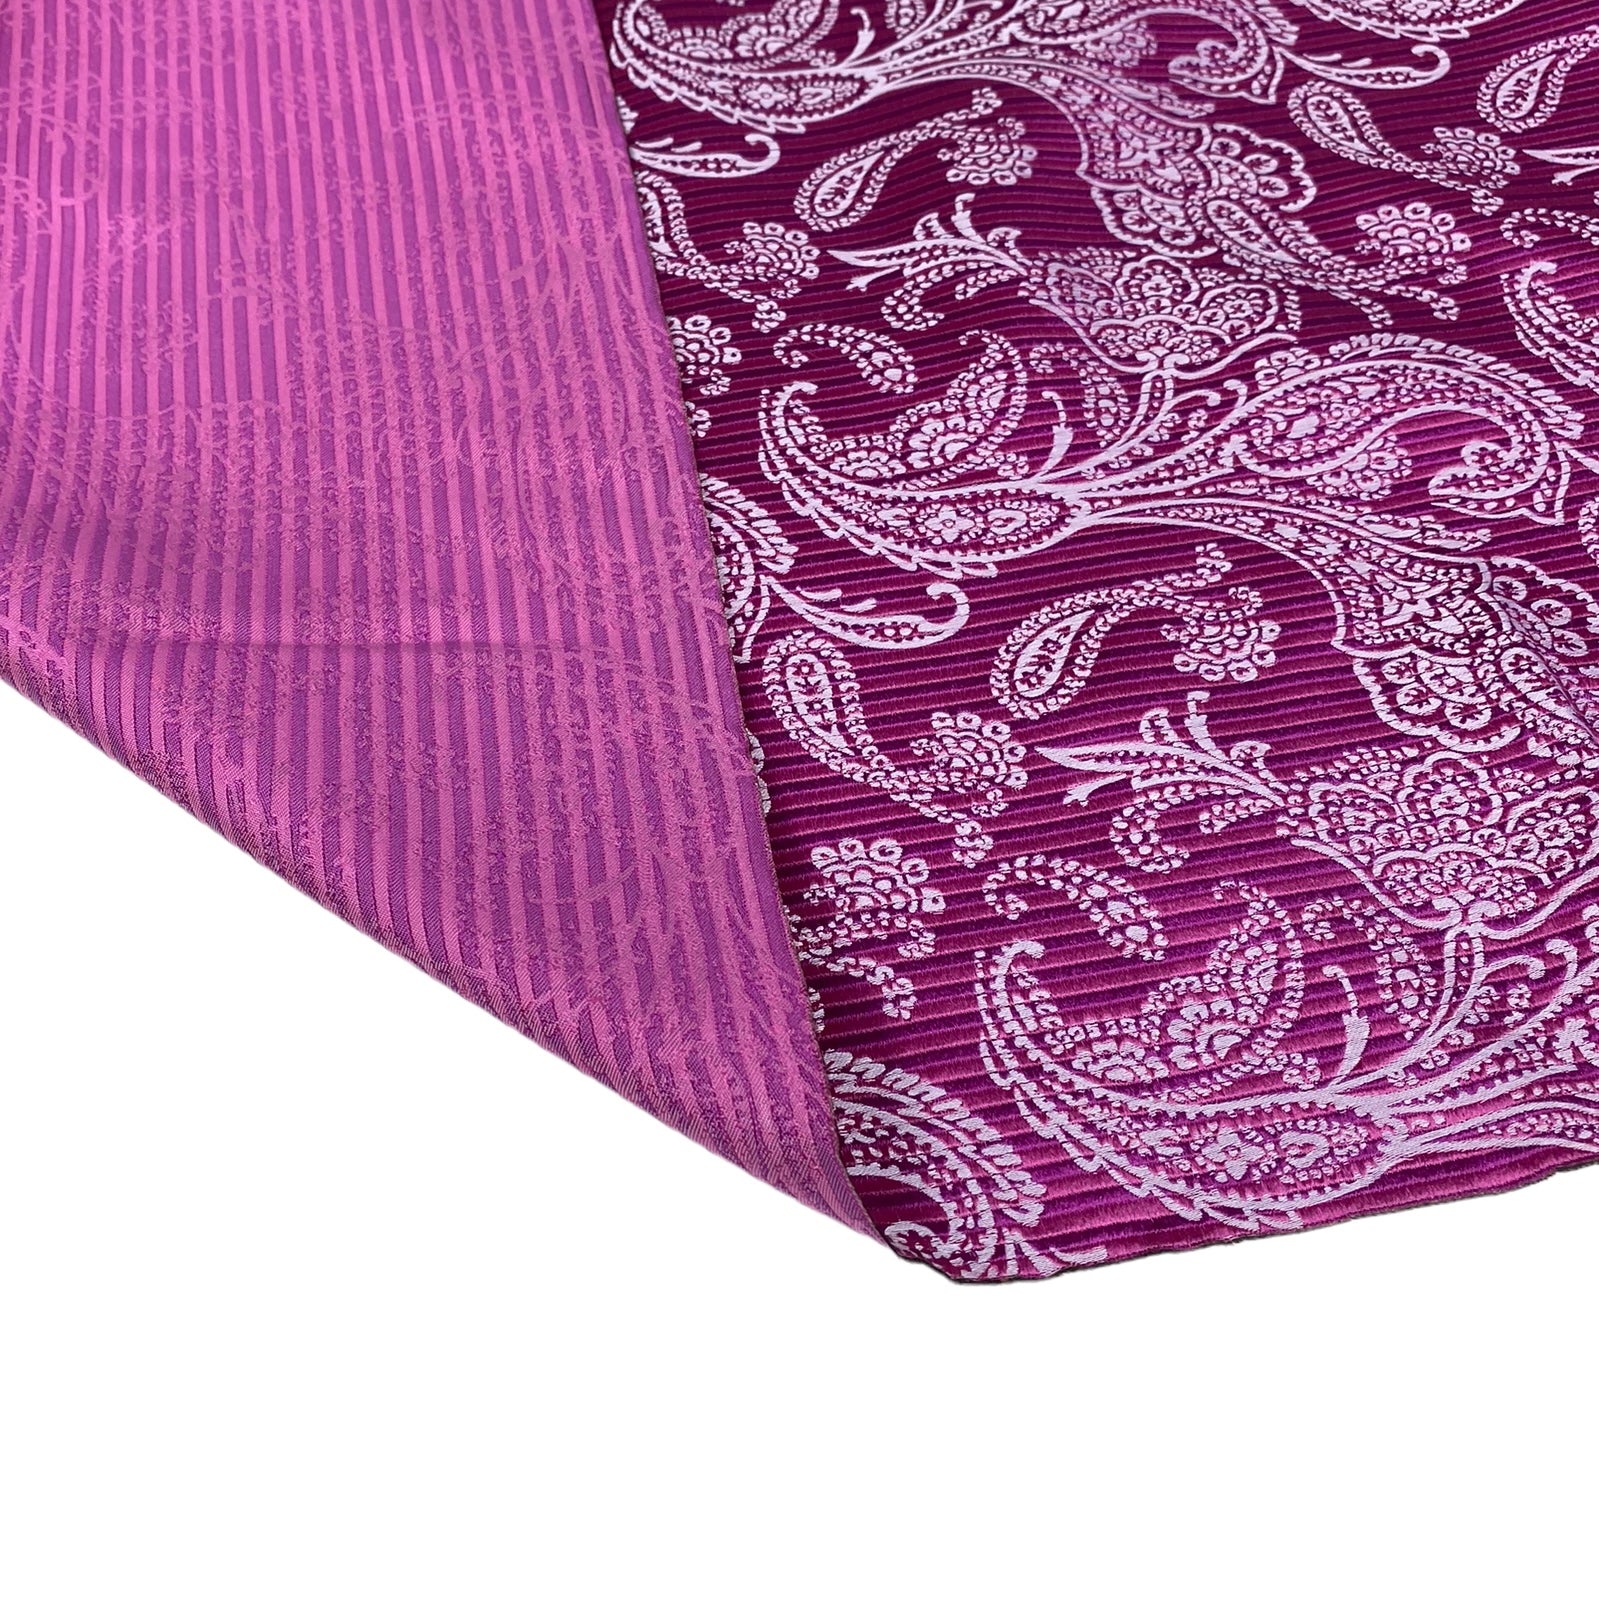 Striped Paisley Silk/Polyester Jacquard - Pink / Magenta / White - Remnant